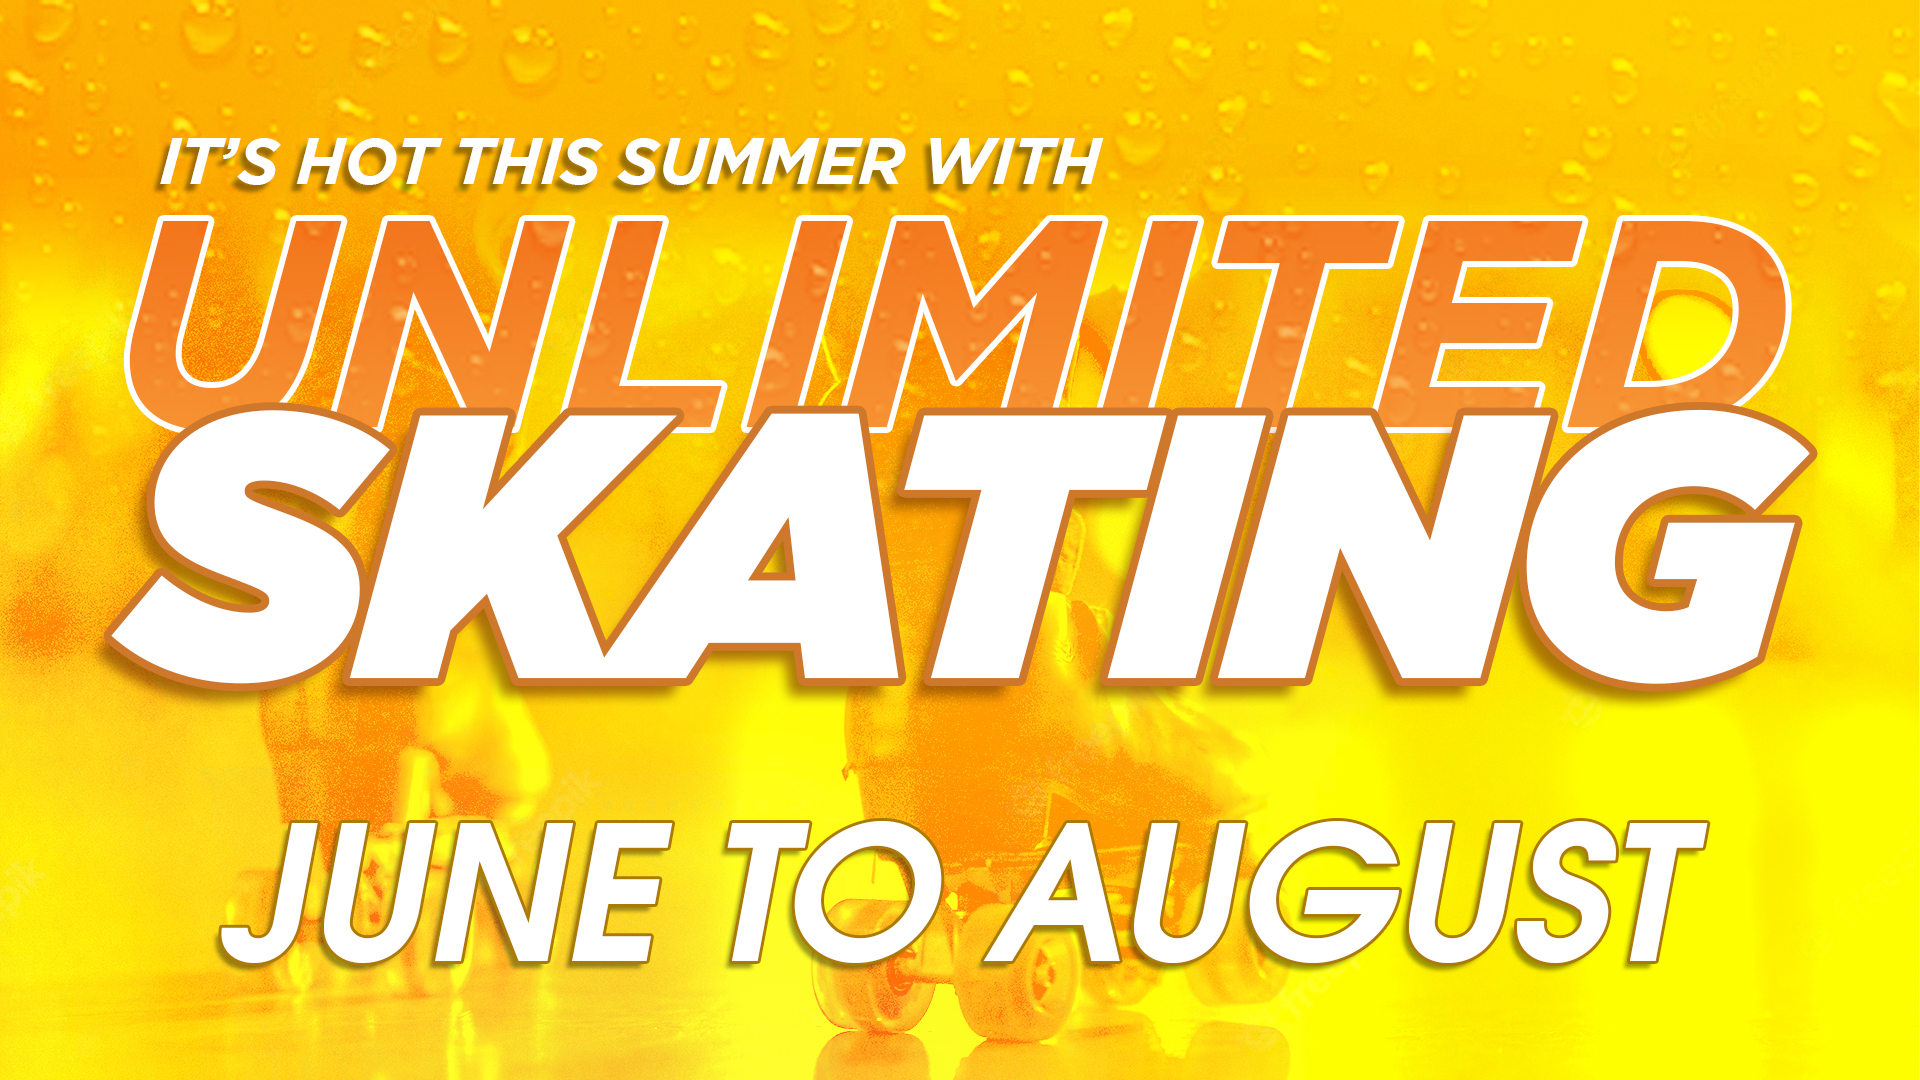 Unlimited Skating is Hot this Summer